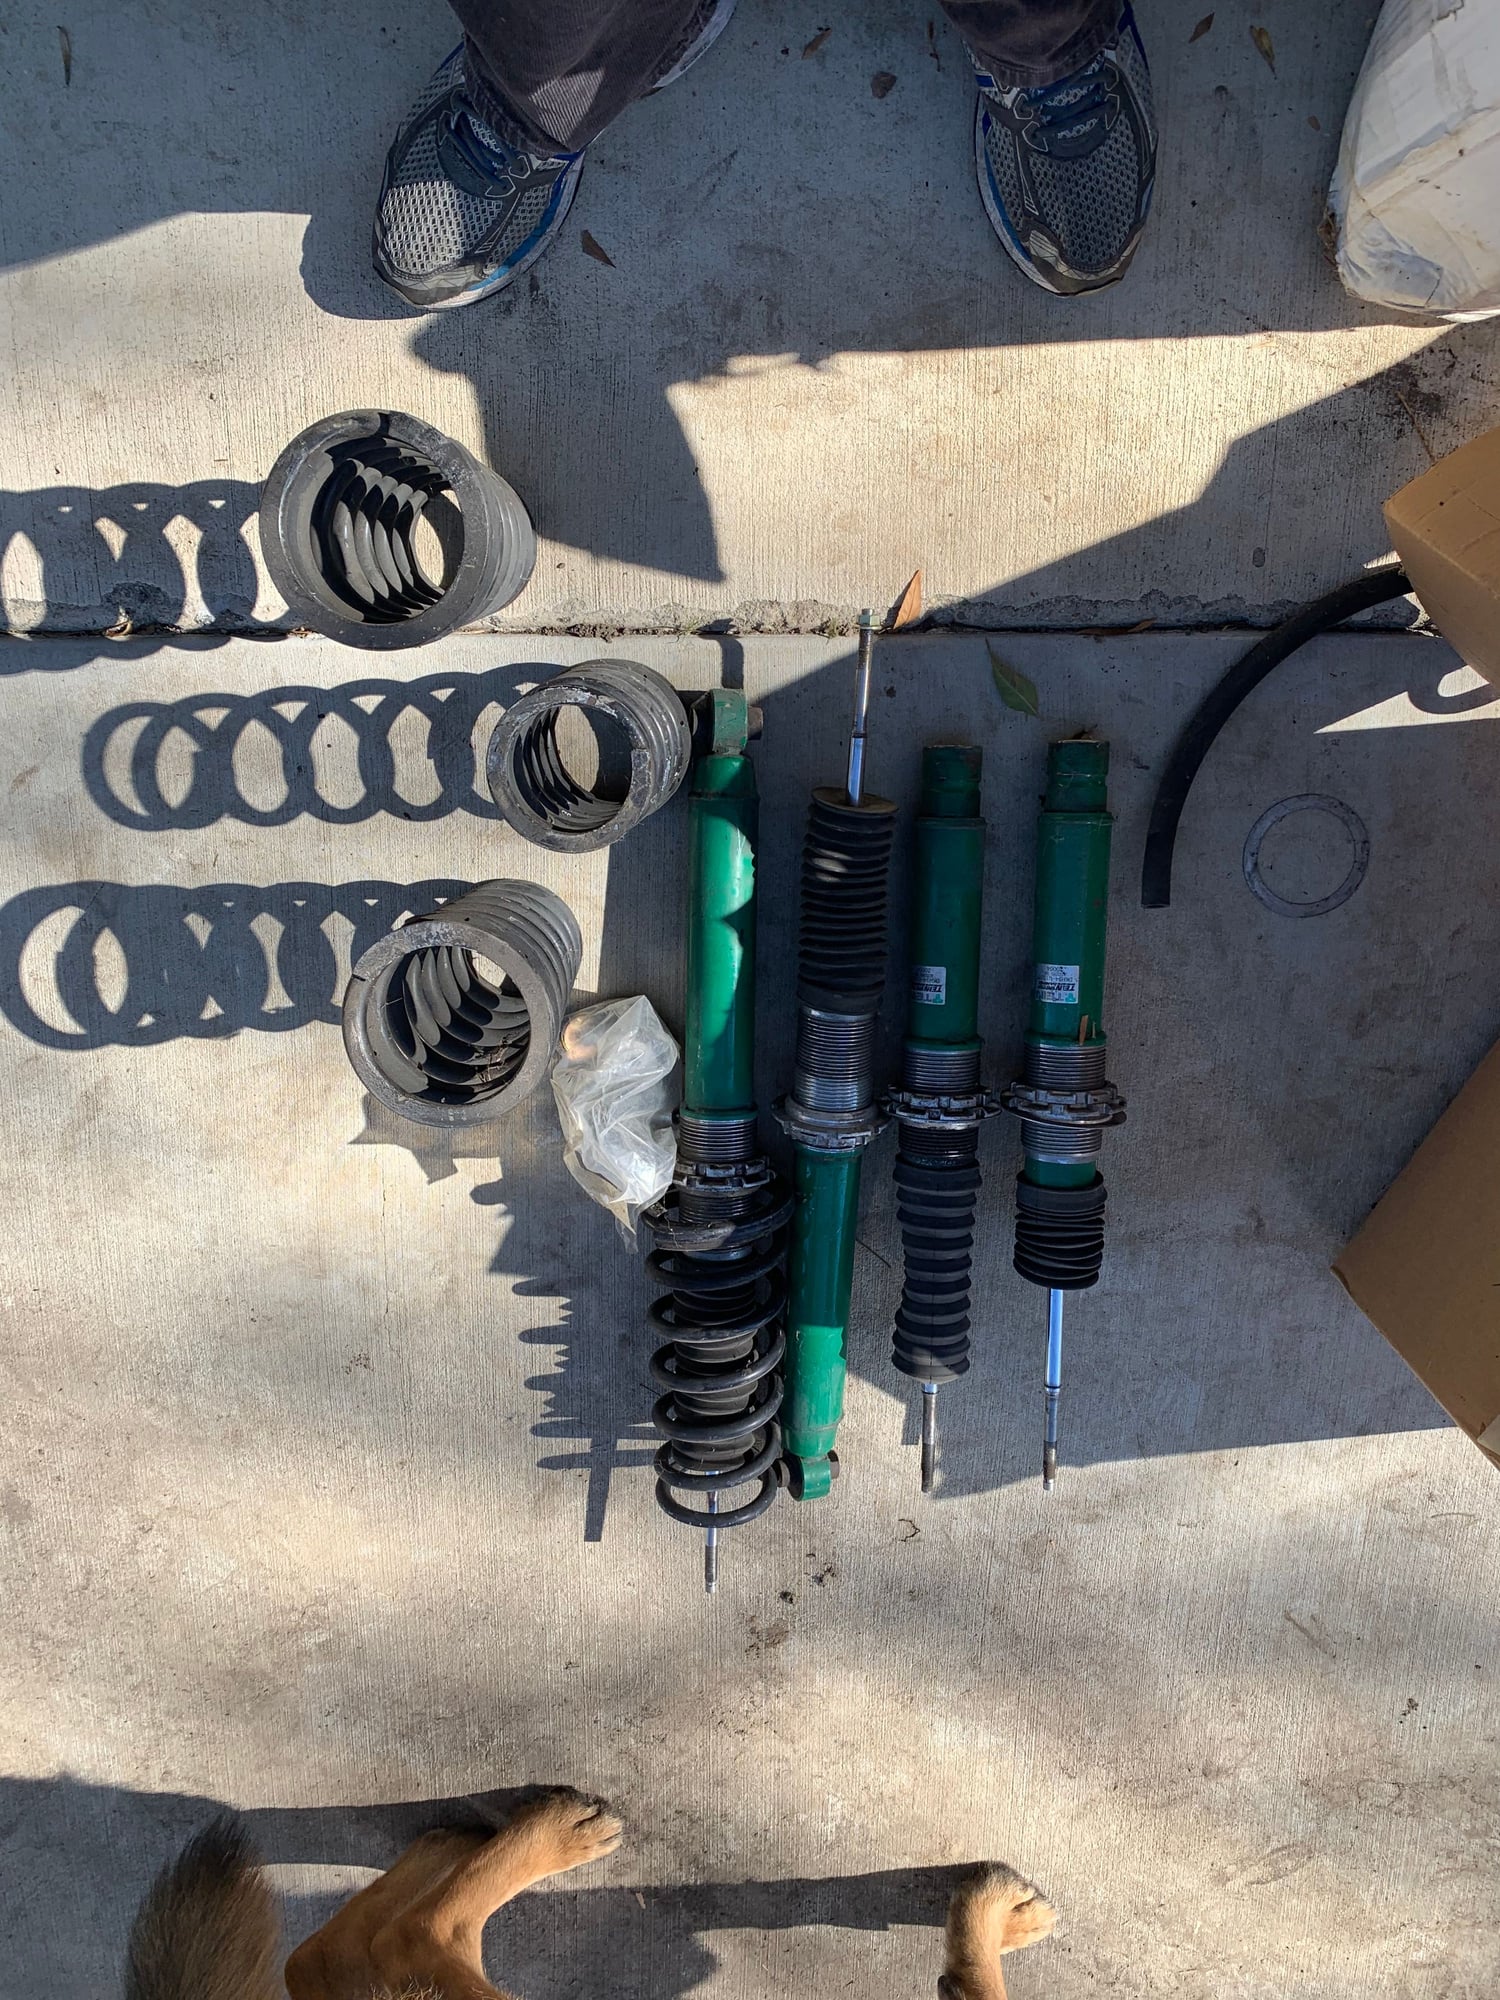 Steering/Suspension - FS: Tein super street coil-overs -$300 - Used - 2000 to 2004 Acura CL - 2004 to 2008 Honda Accord - Winnetka, CA 91306, United States